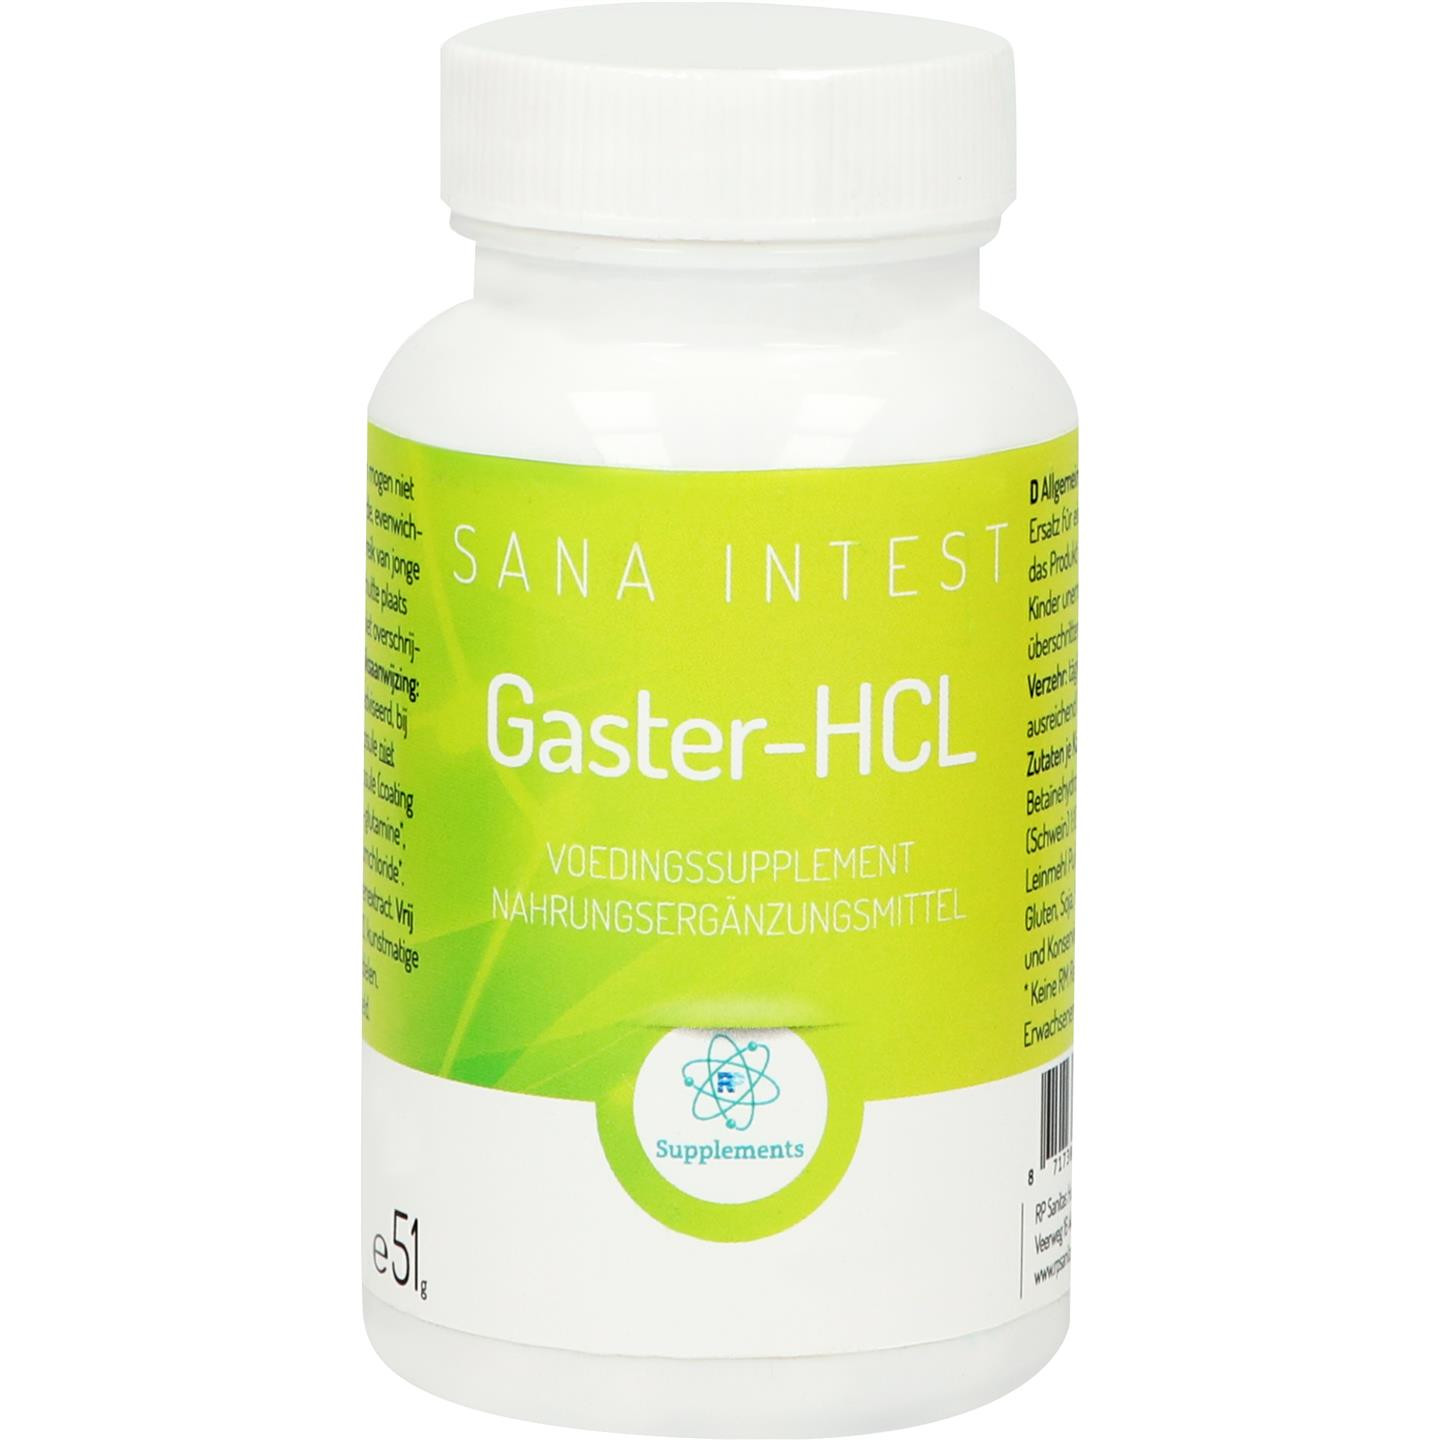 Gaster-HCL